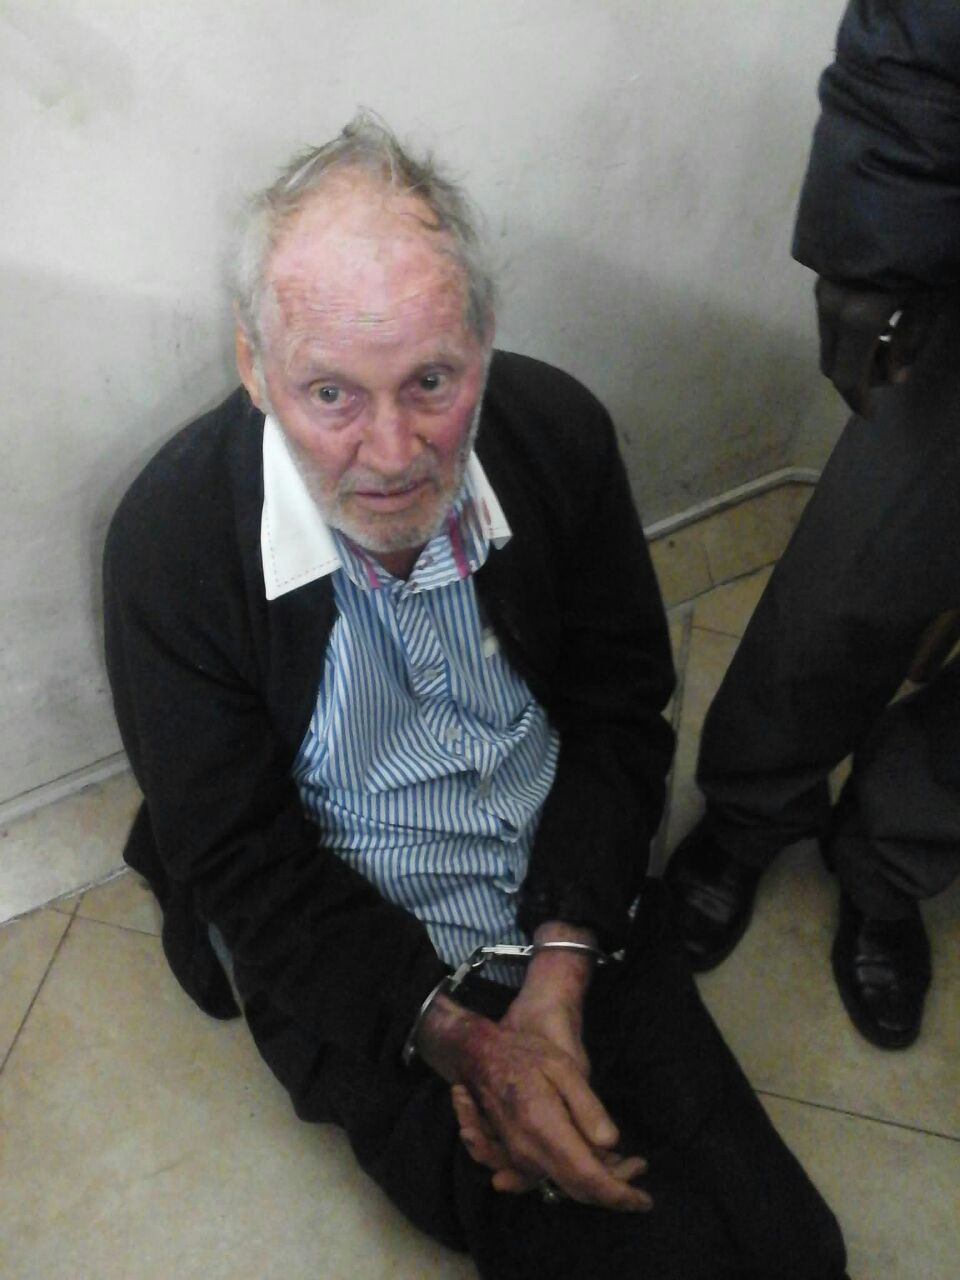 This is picture of what looks like former Zimbabwe Broadcasting Corporation (ZBC) news anchor Dave Emberton after he was arrested by police for allegedly trying to steal bacon at a supermarket in Harare